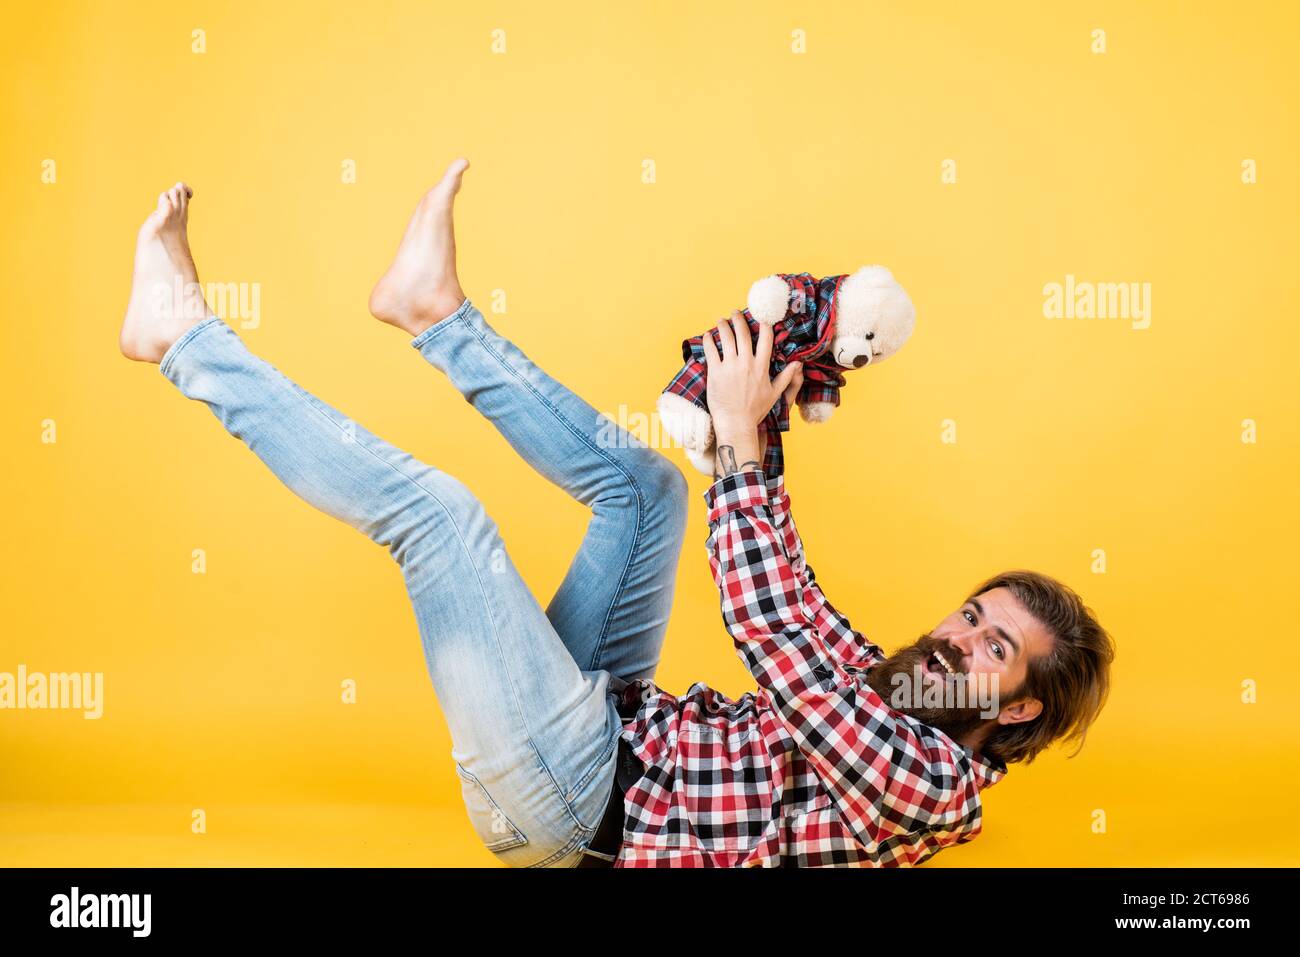 guy enjoy valentines day. best present ever. Valentines day gift for beloved. Holiday celebration concept. Guy with happy face plays with soft toy. Childish mood concept. Stock Photo